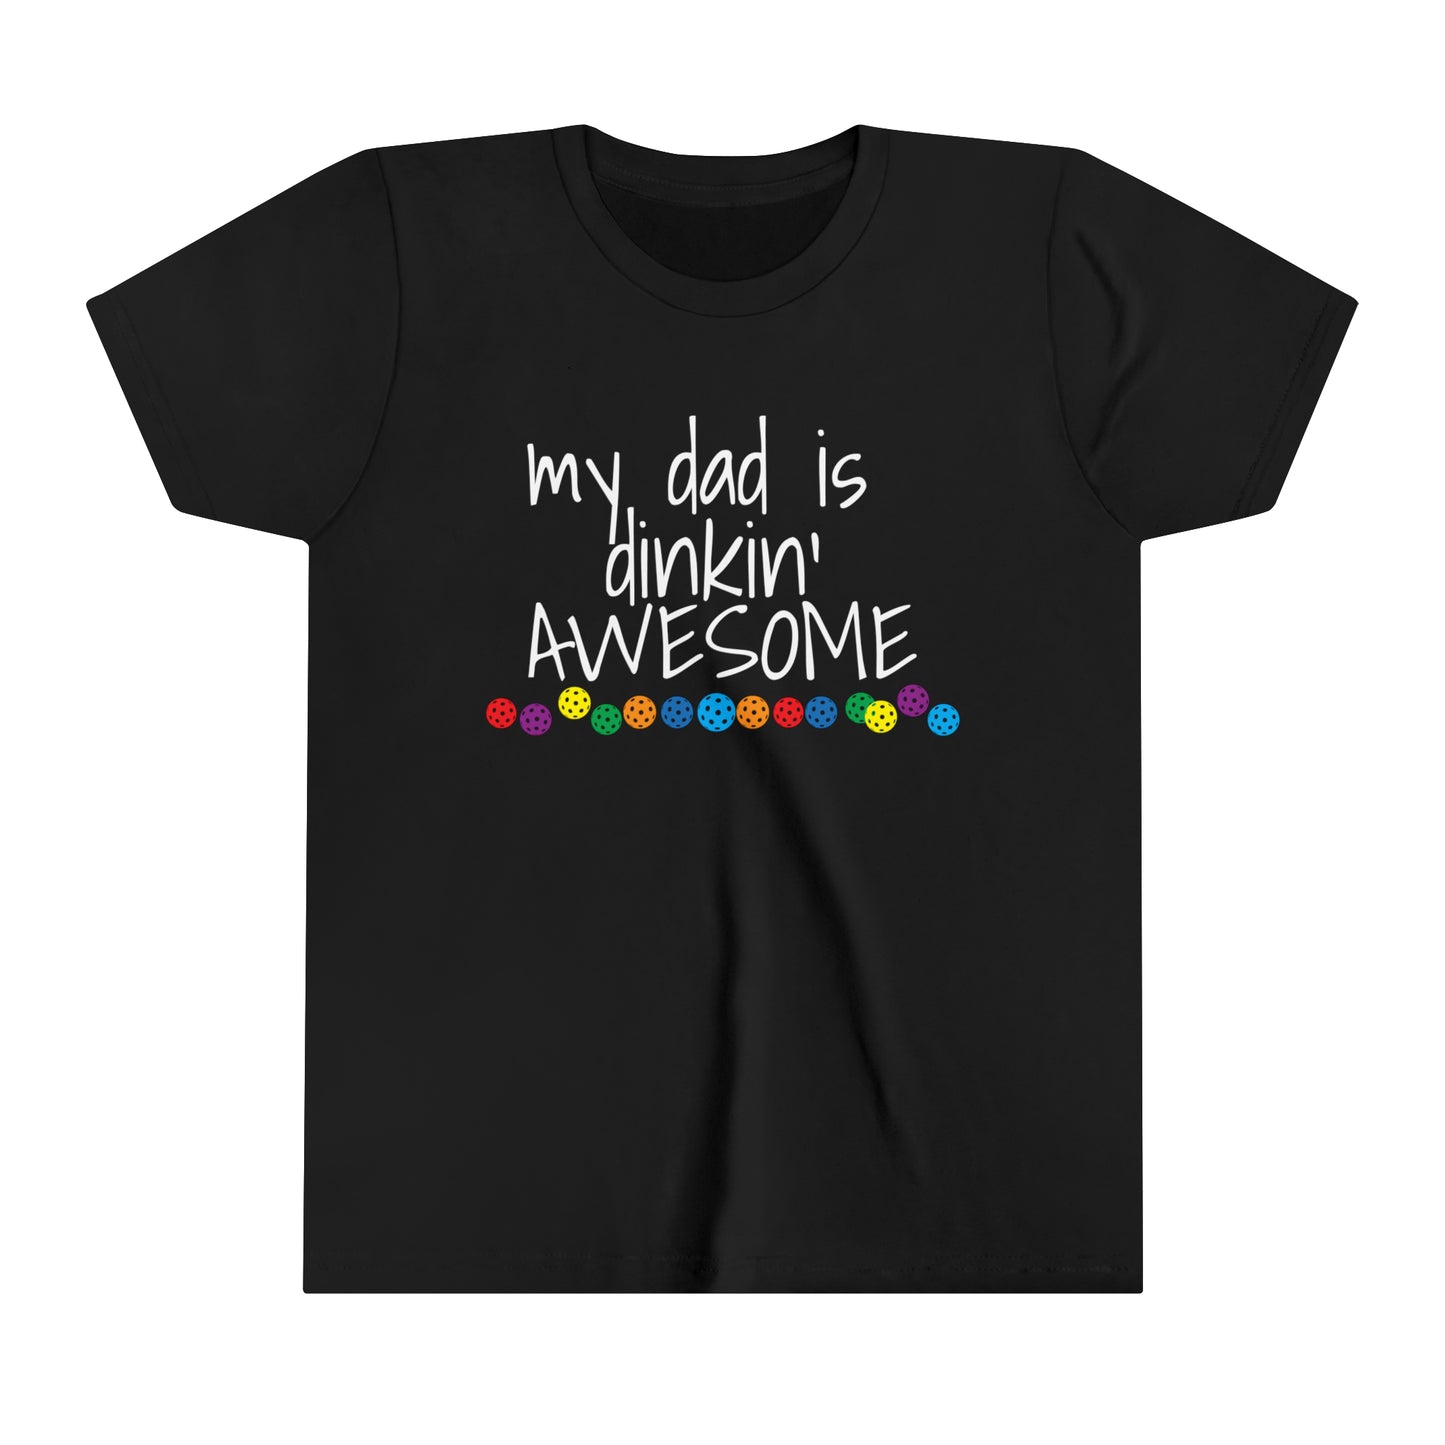 PIckleball Youth Short Sleeve Tee - my dad is dinkin awesome